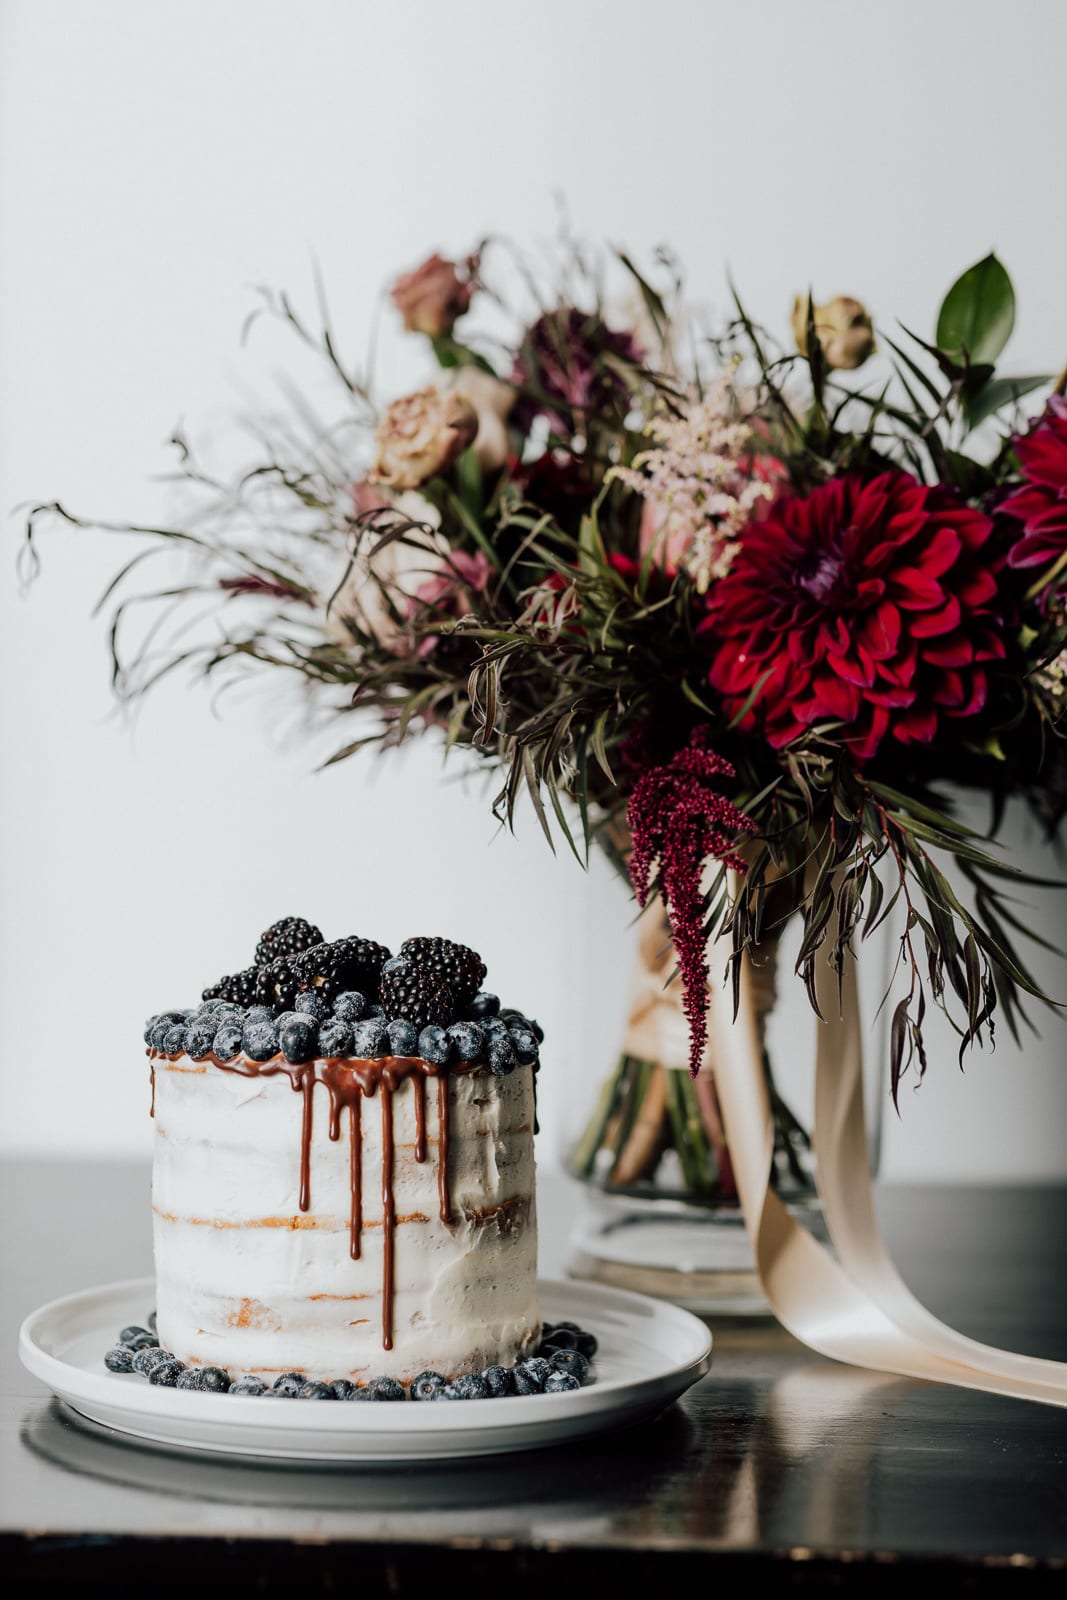 Wedding cake with berries and wedding flowers in vase